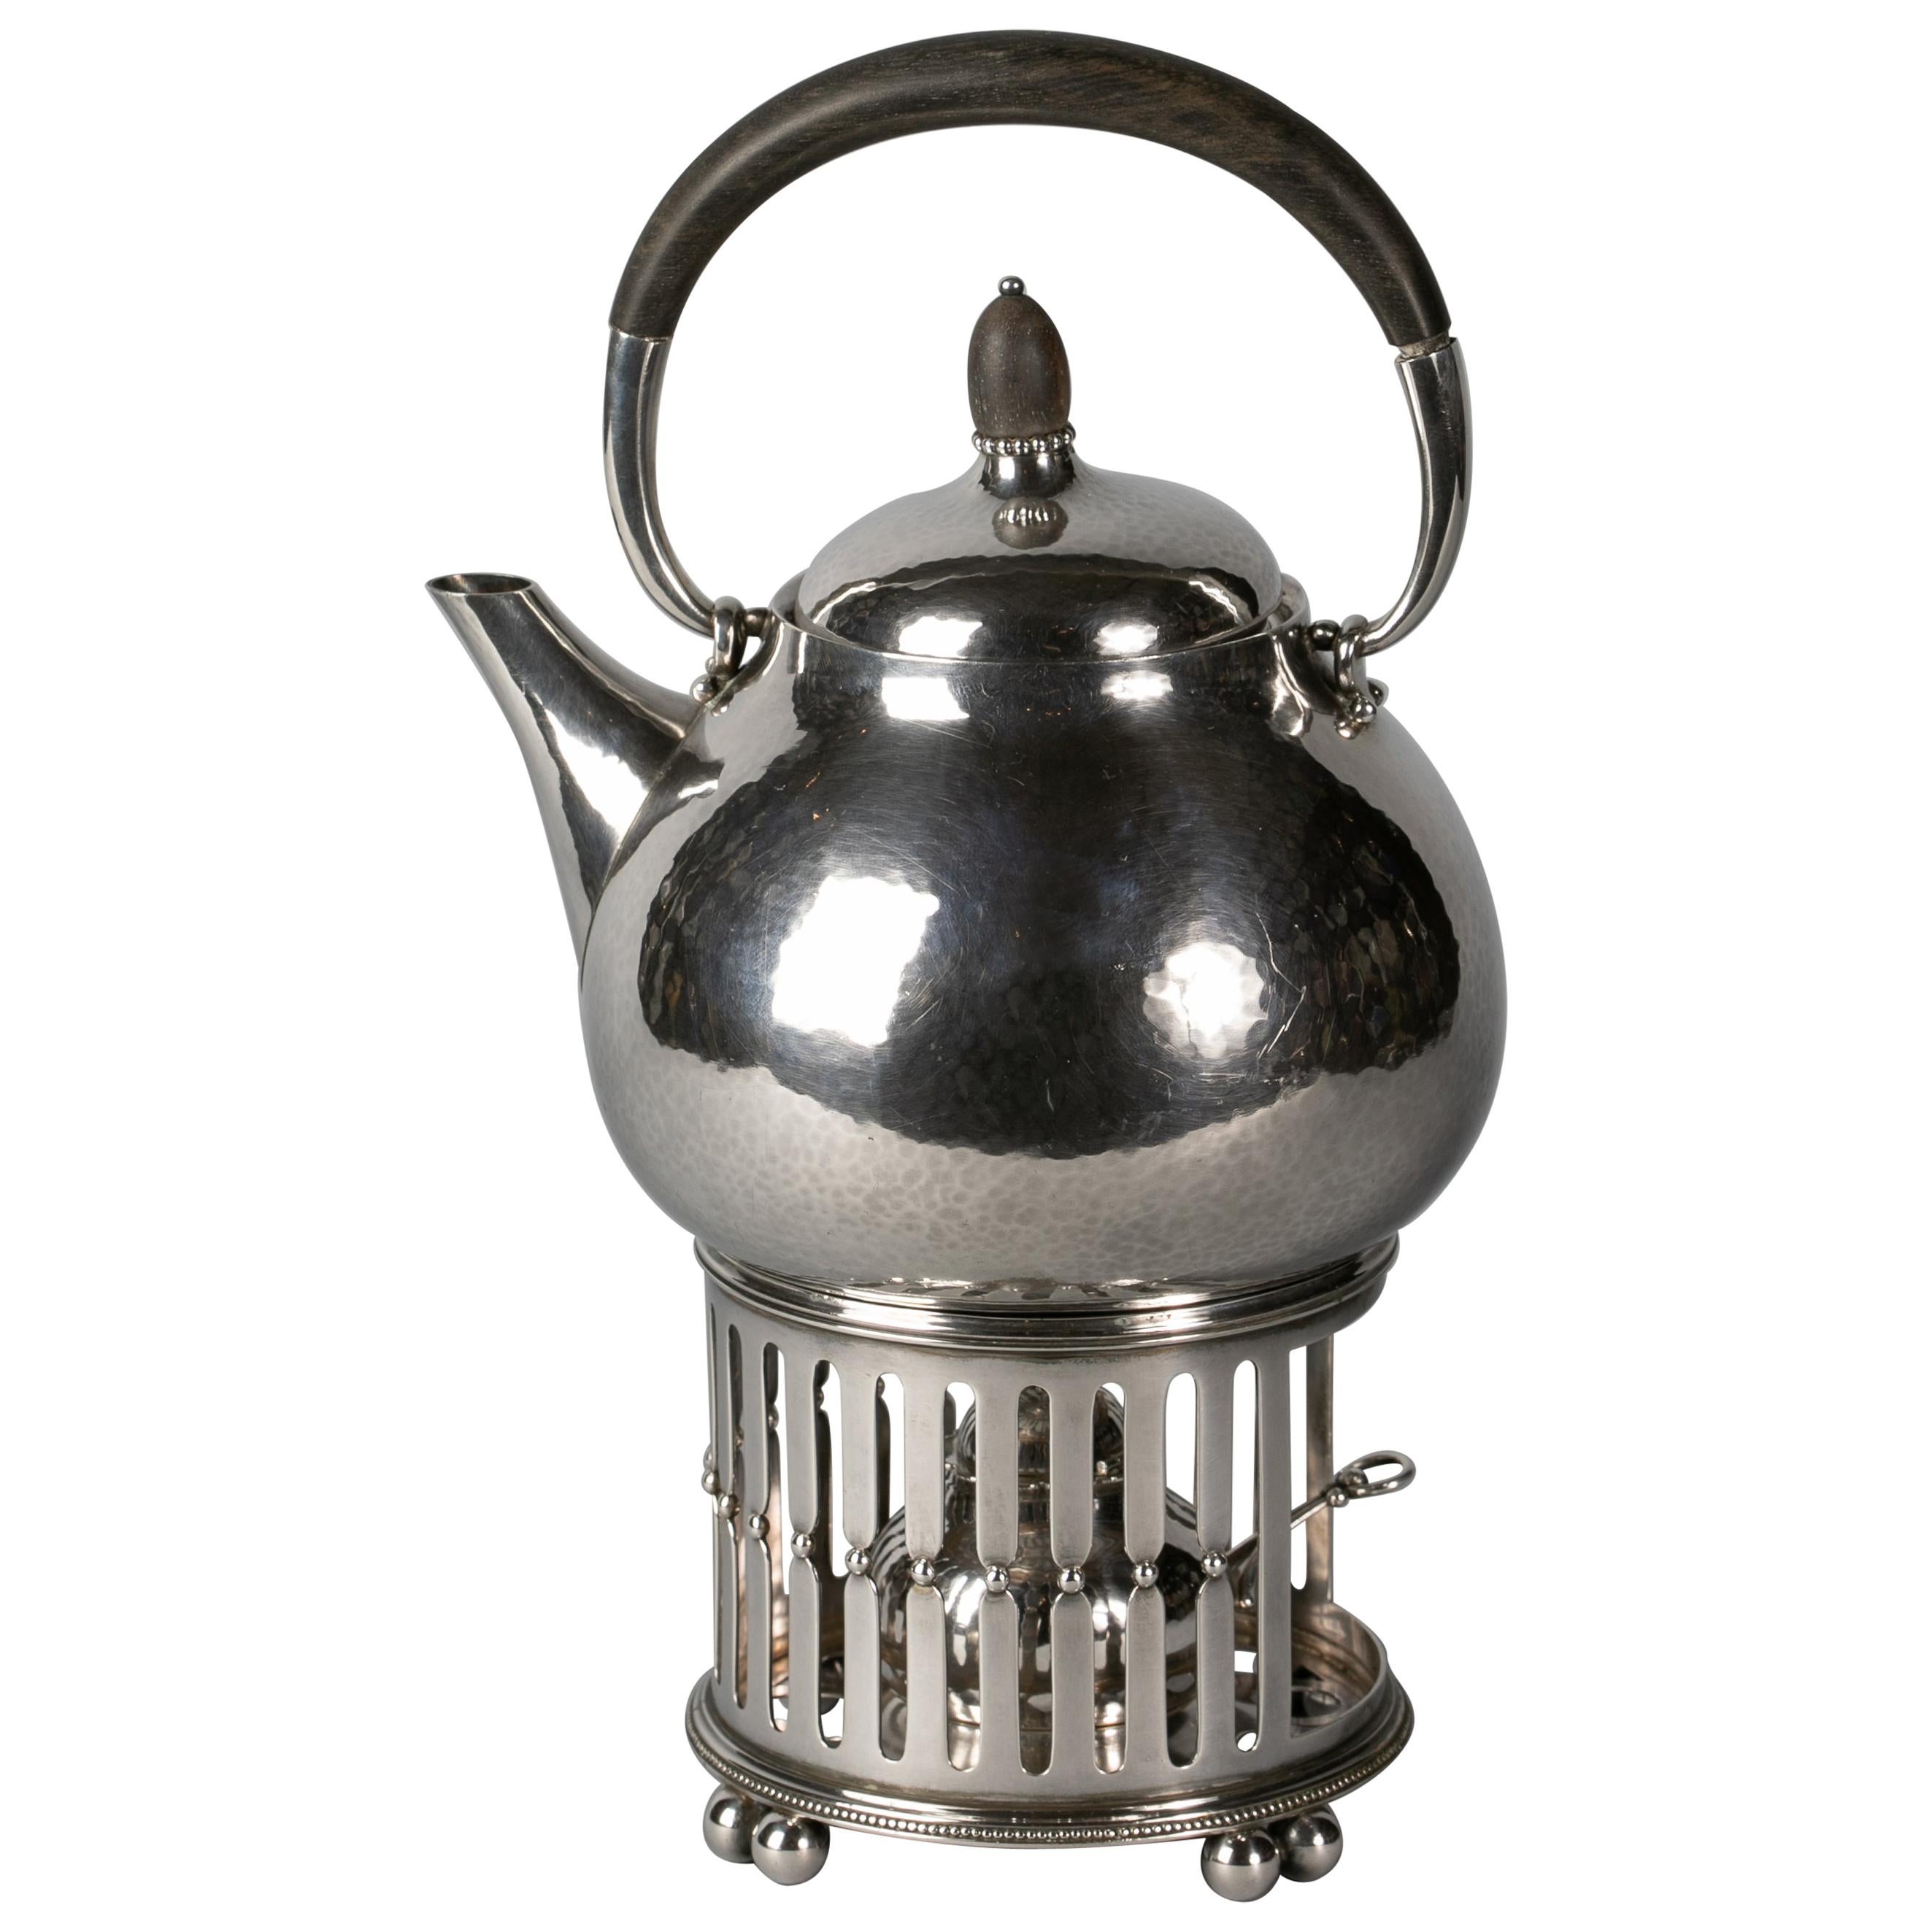 Jensen Sterling Silver Kettle on Stand with Ebony finial and Handle, circa 1920